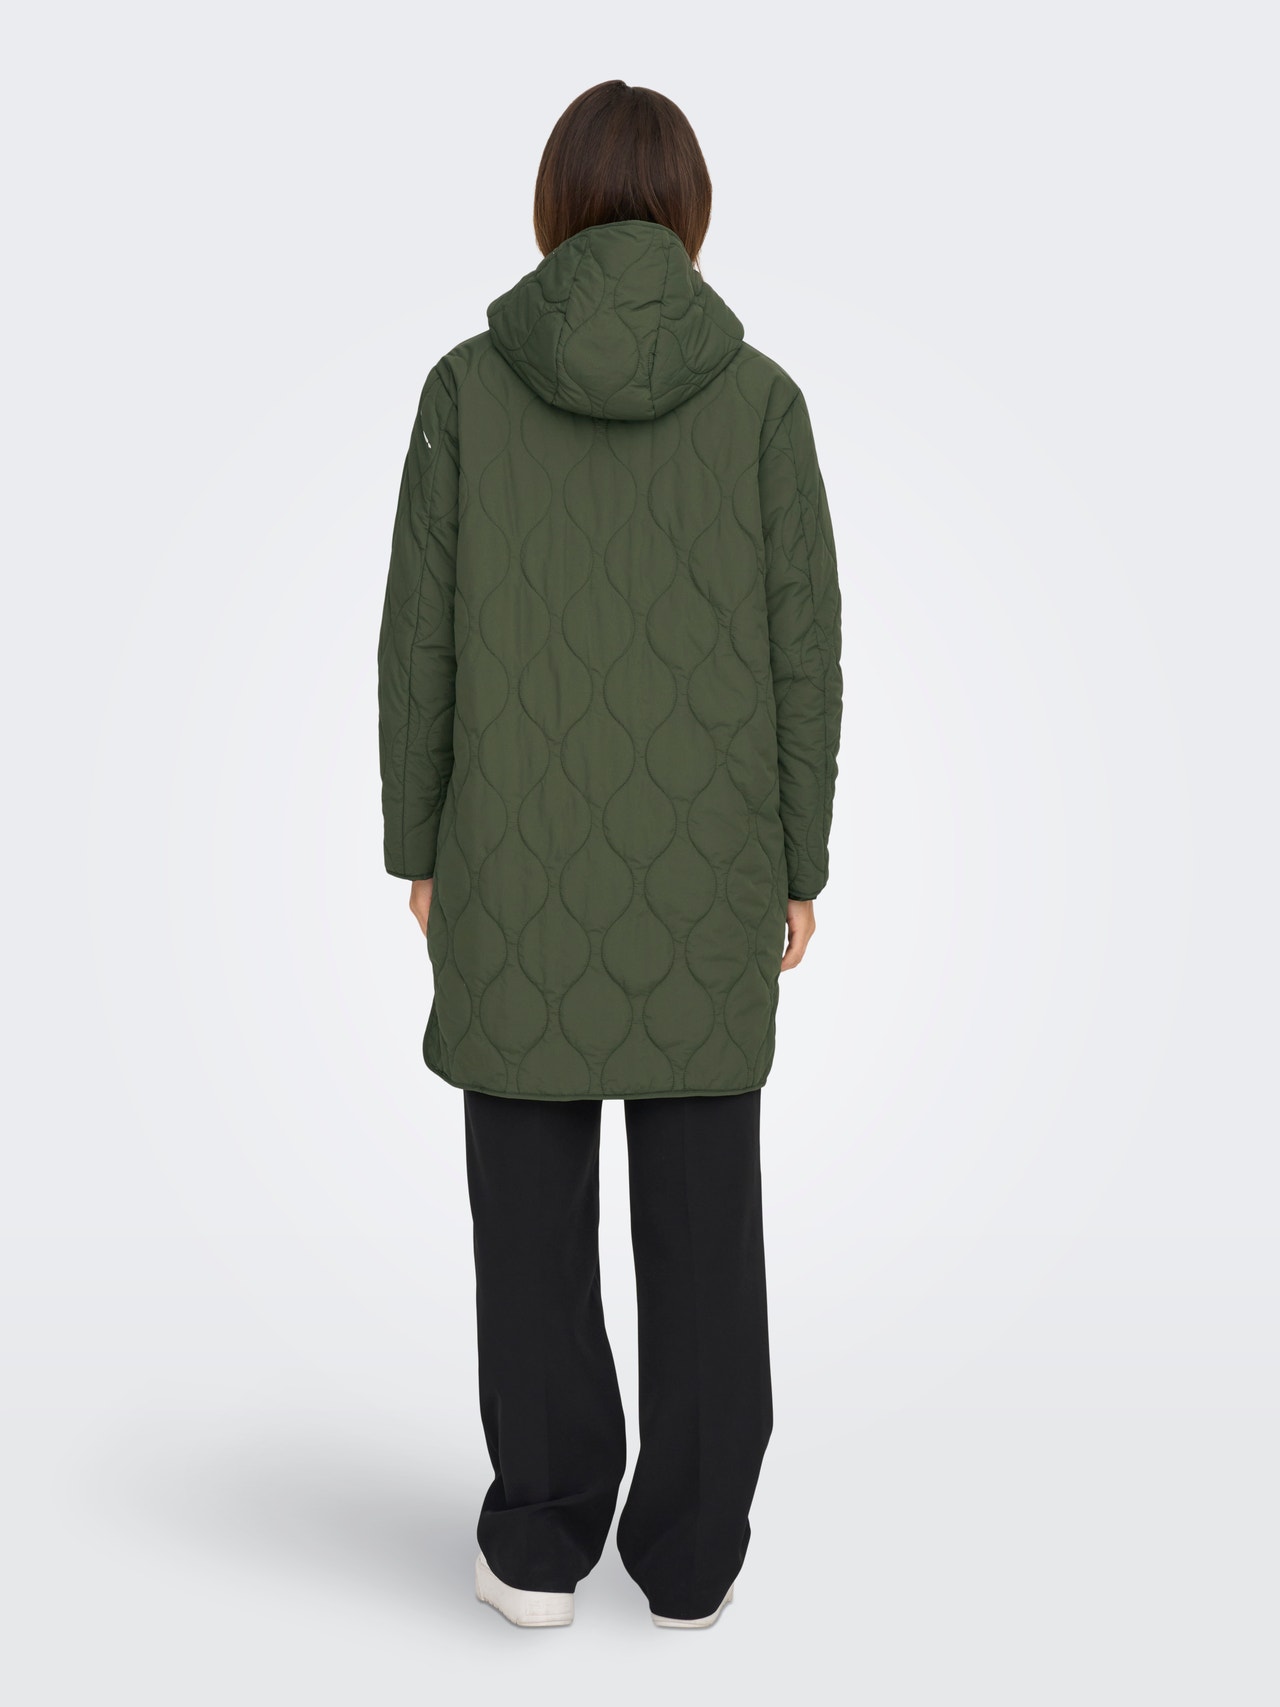 ONLY Hood Coat -Forest Night - 15302203